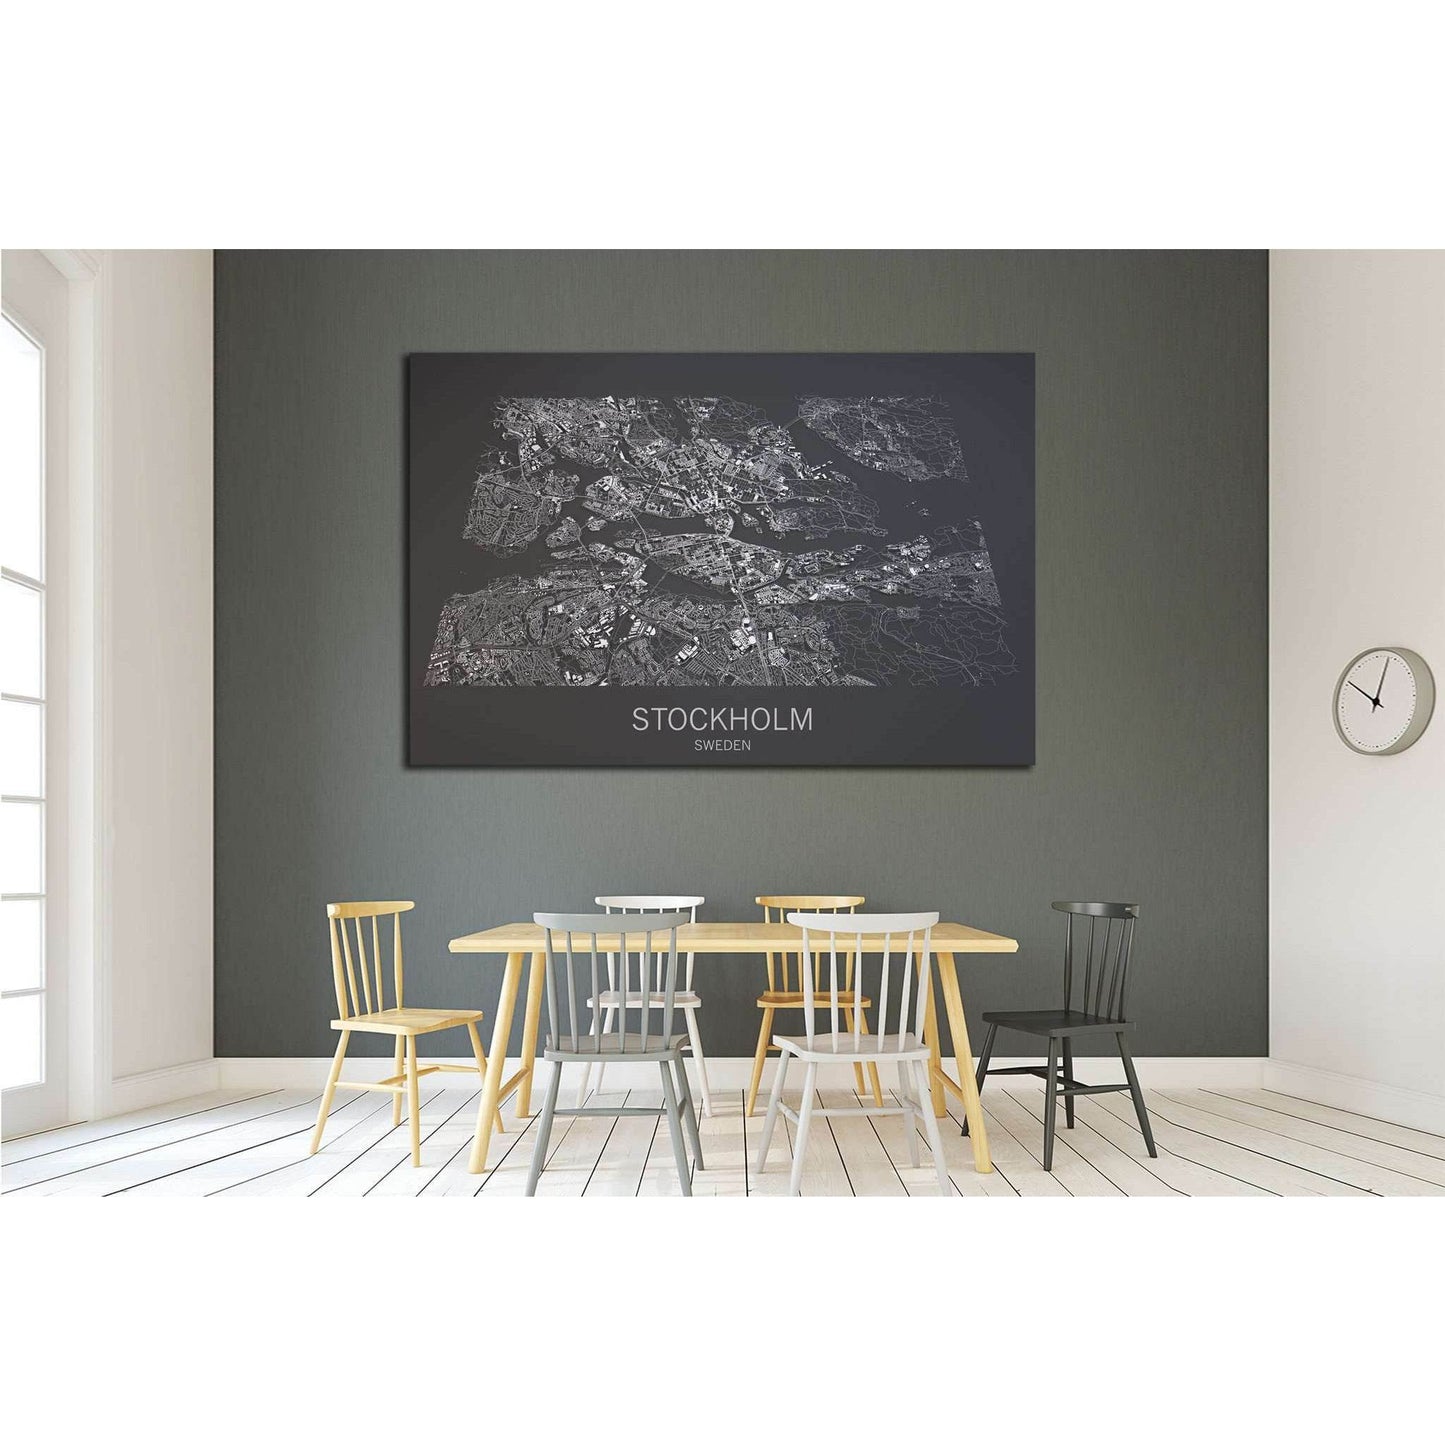 Black & White Stockholm Map Canvas PrintDecorate your walls with a stunning Stockholm Map Canvas Art Print from the world's largest art gallery. Choose from thousands of Black and White Map artworks with various sizing options. Choose your perfect art pri